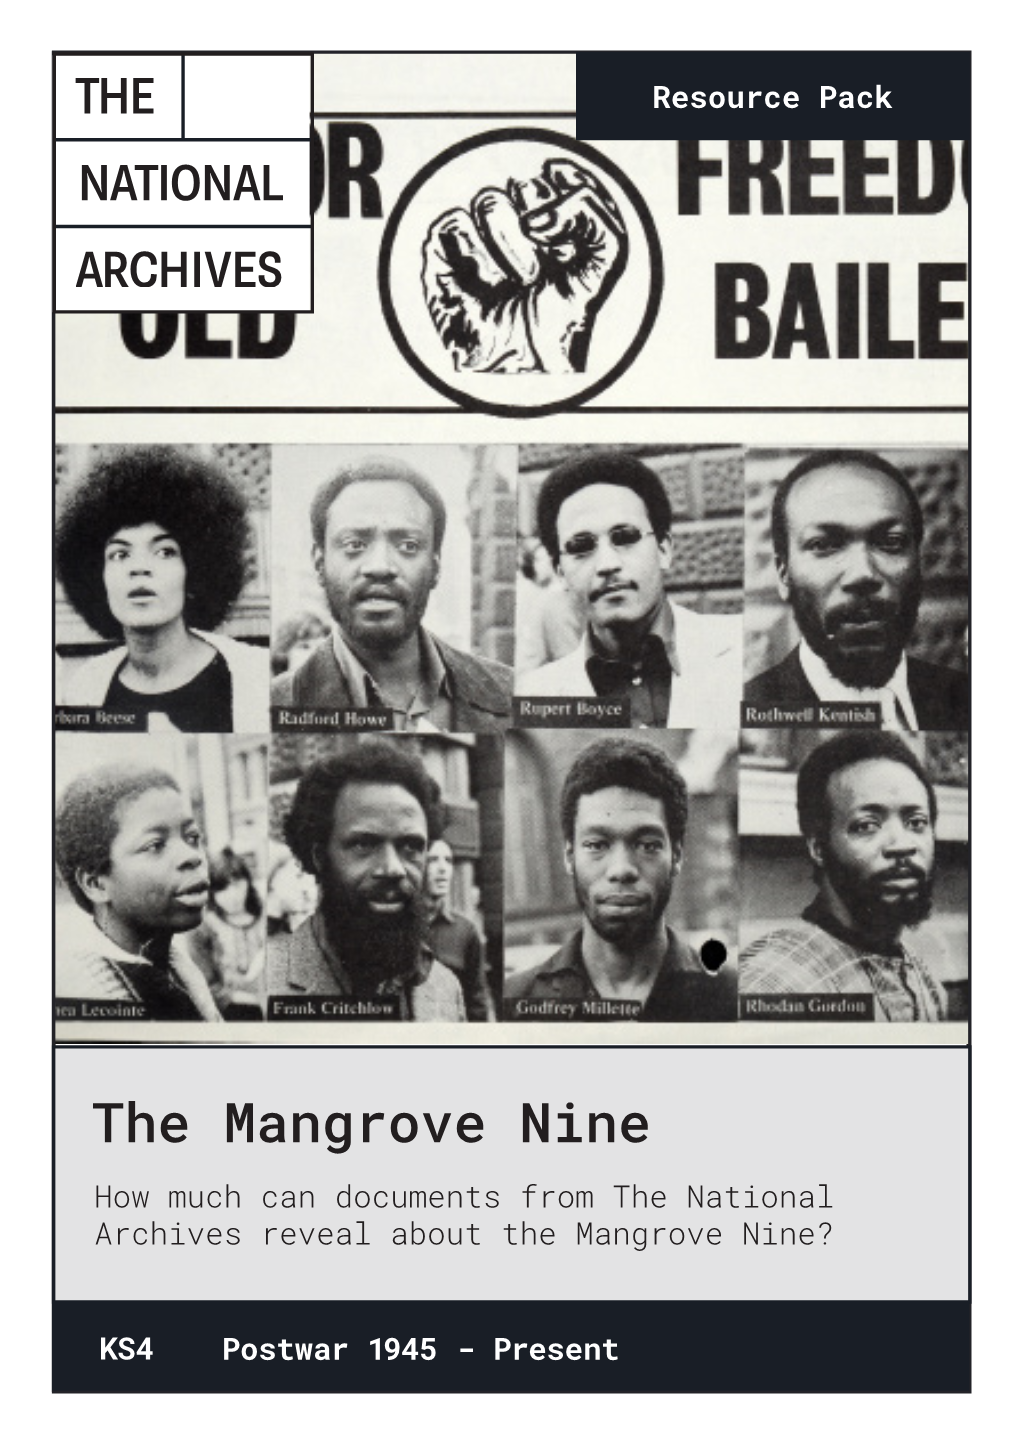 The Mangrove Nine How Much Can Documents from the National Archives Reveal About the Mangrove Nine?